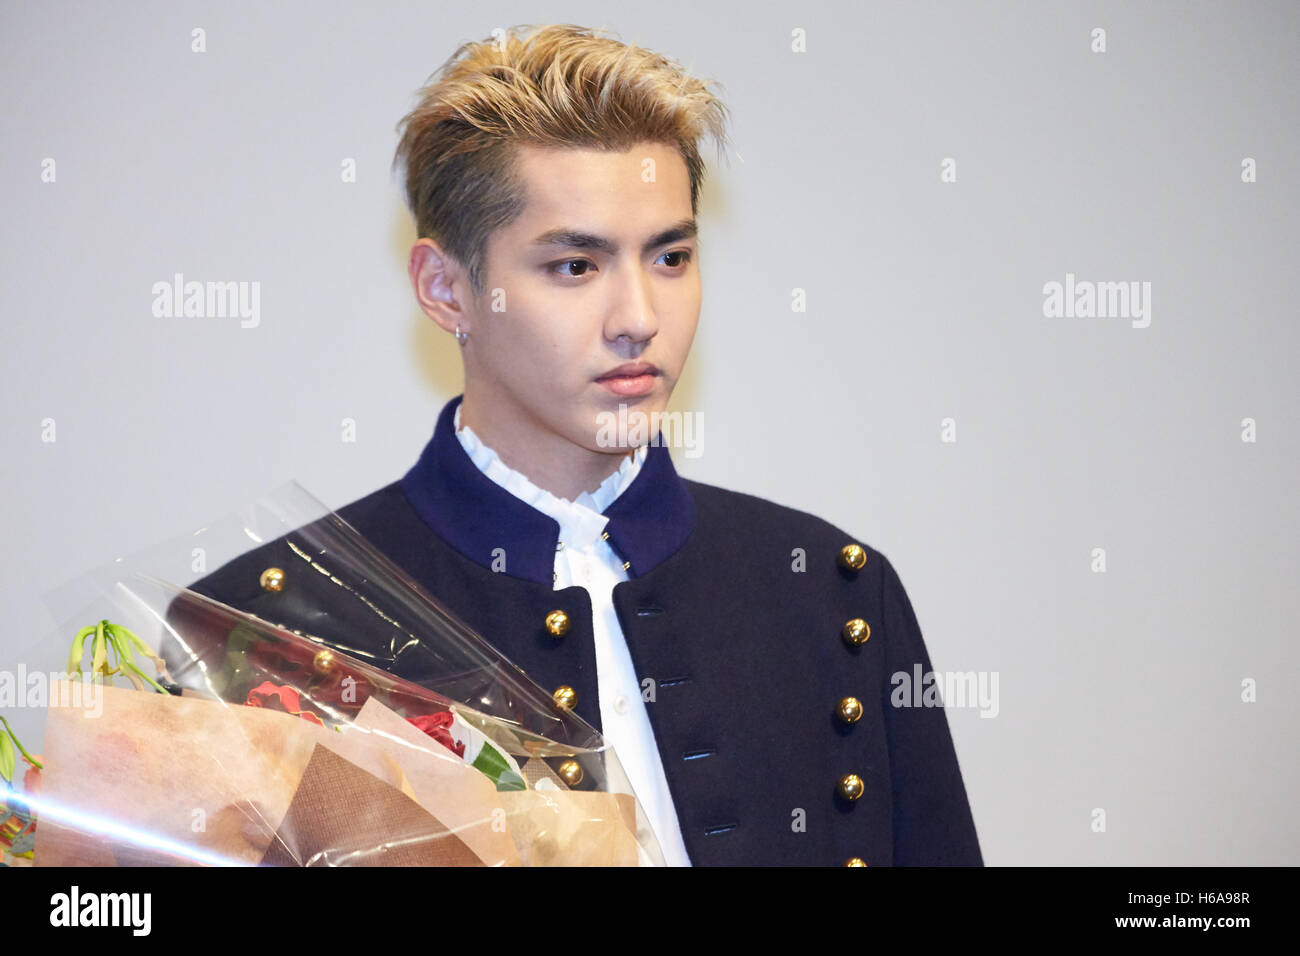 1,369 Kris Wu Yifan Photos & High Res Pictures - Getty Images